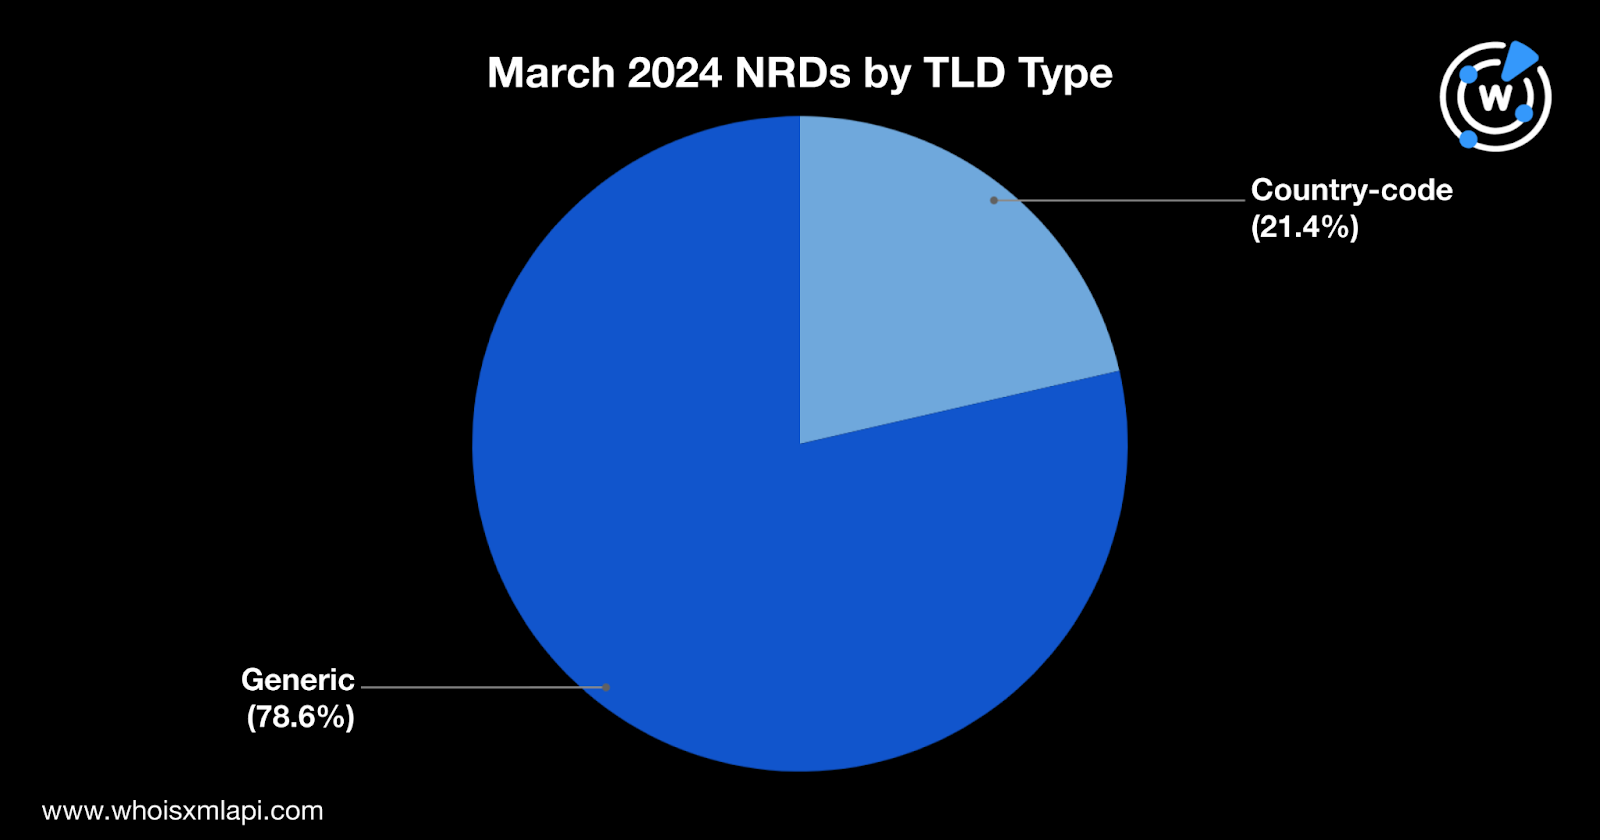 March 2024 NRDs by TLDs type